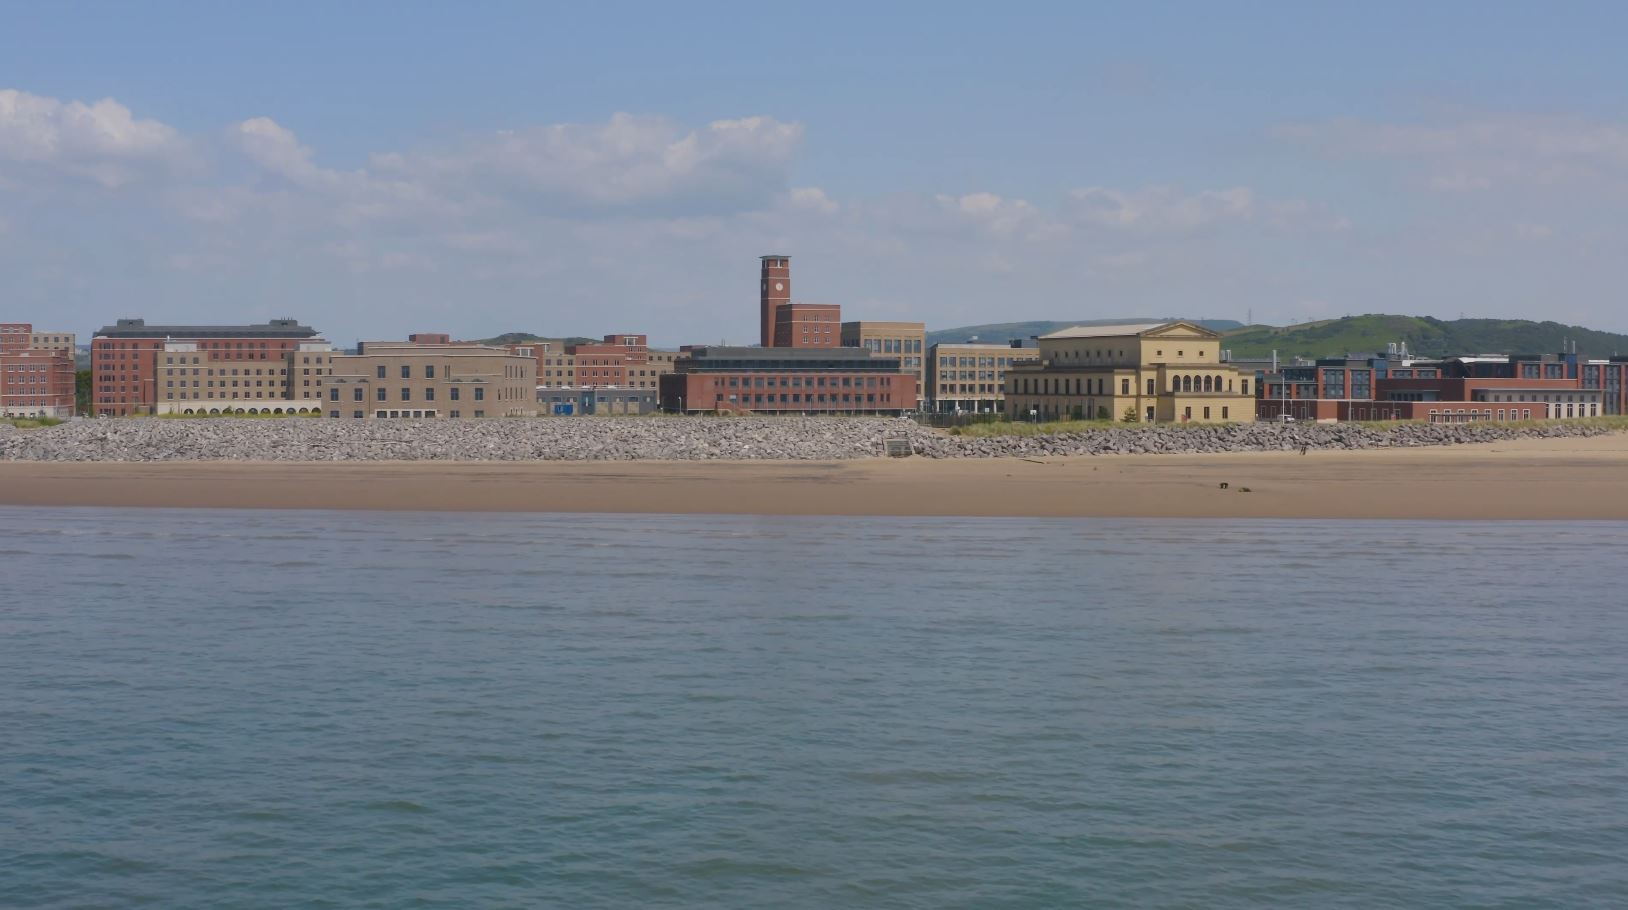 Bay Campus from the sea